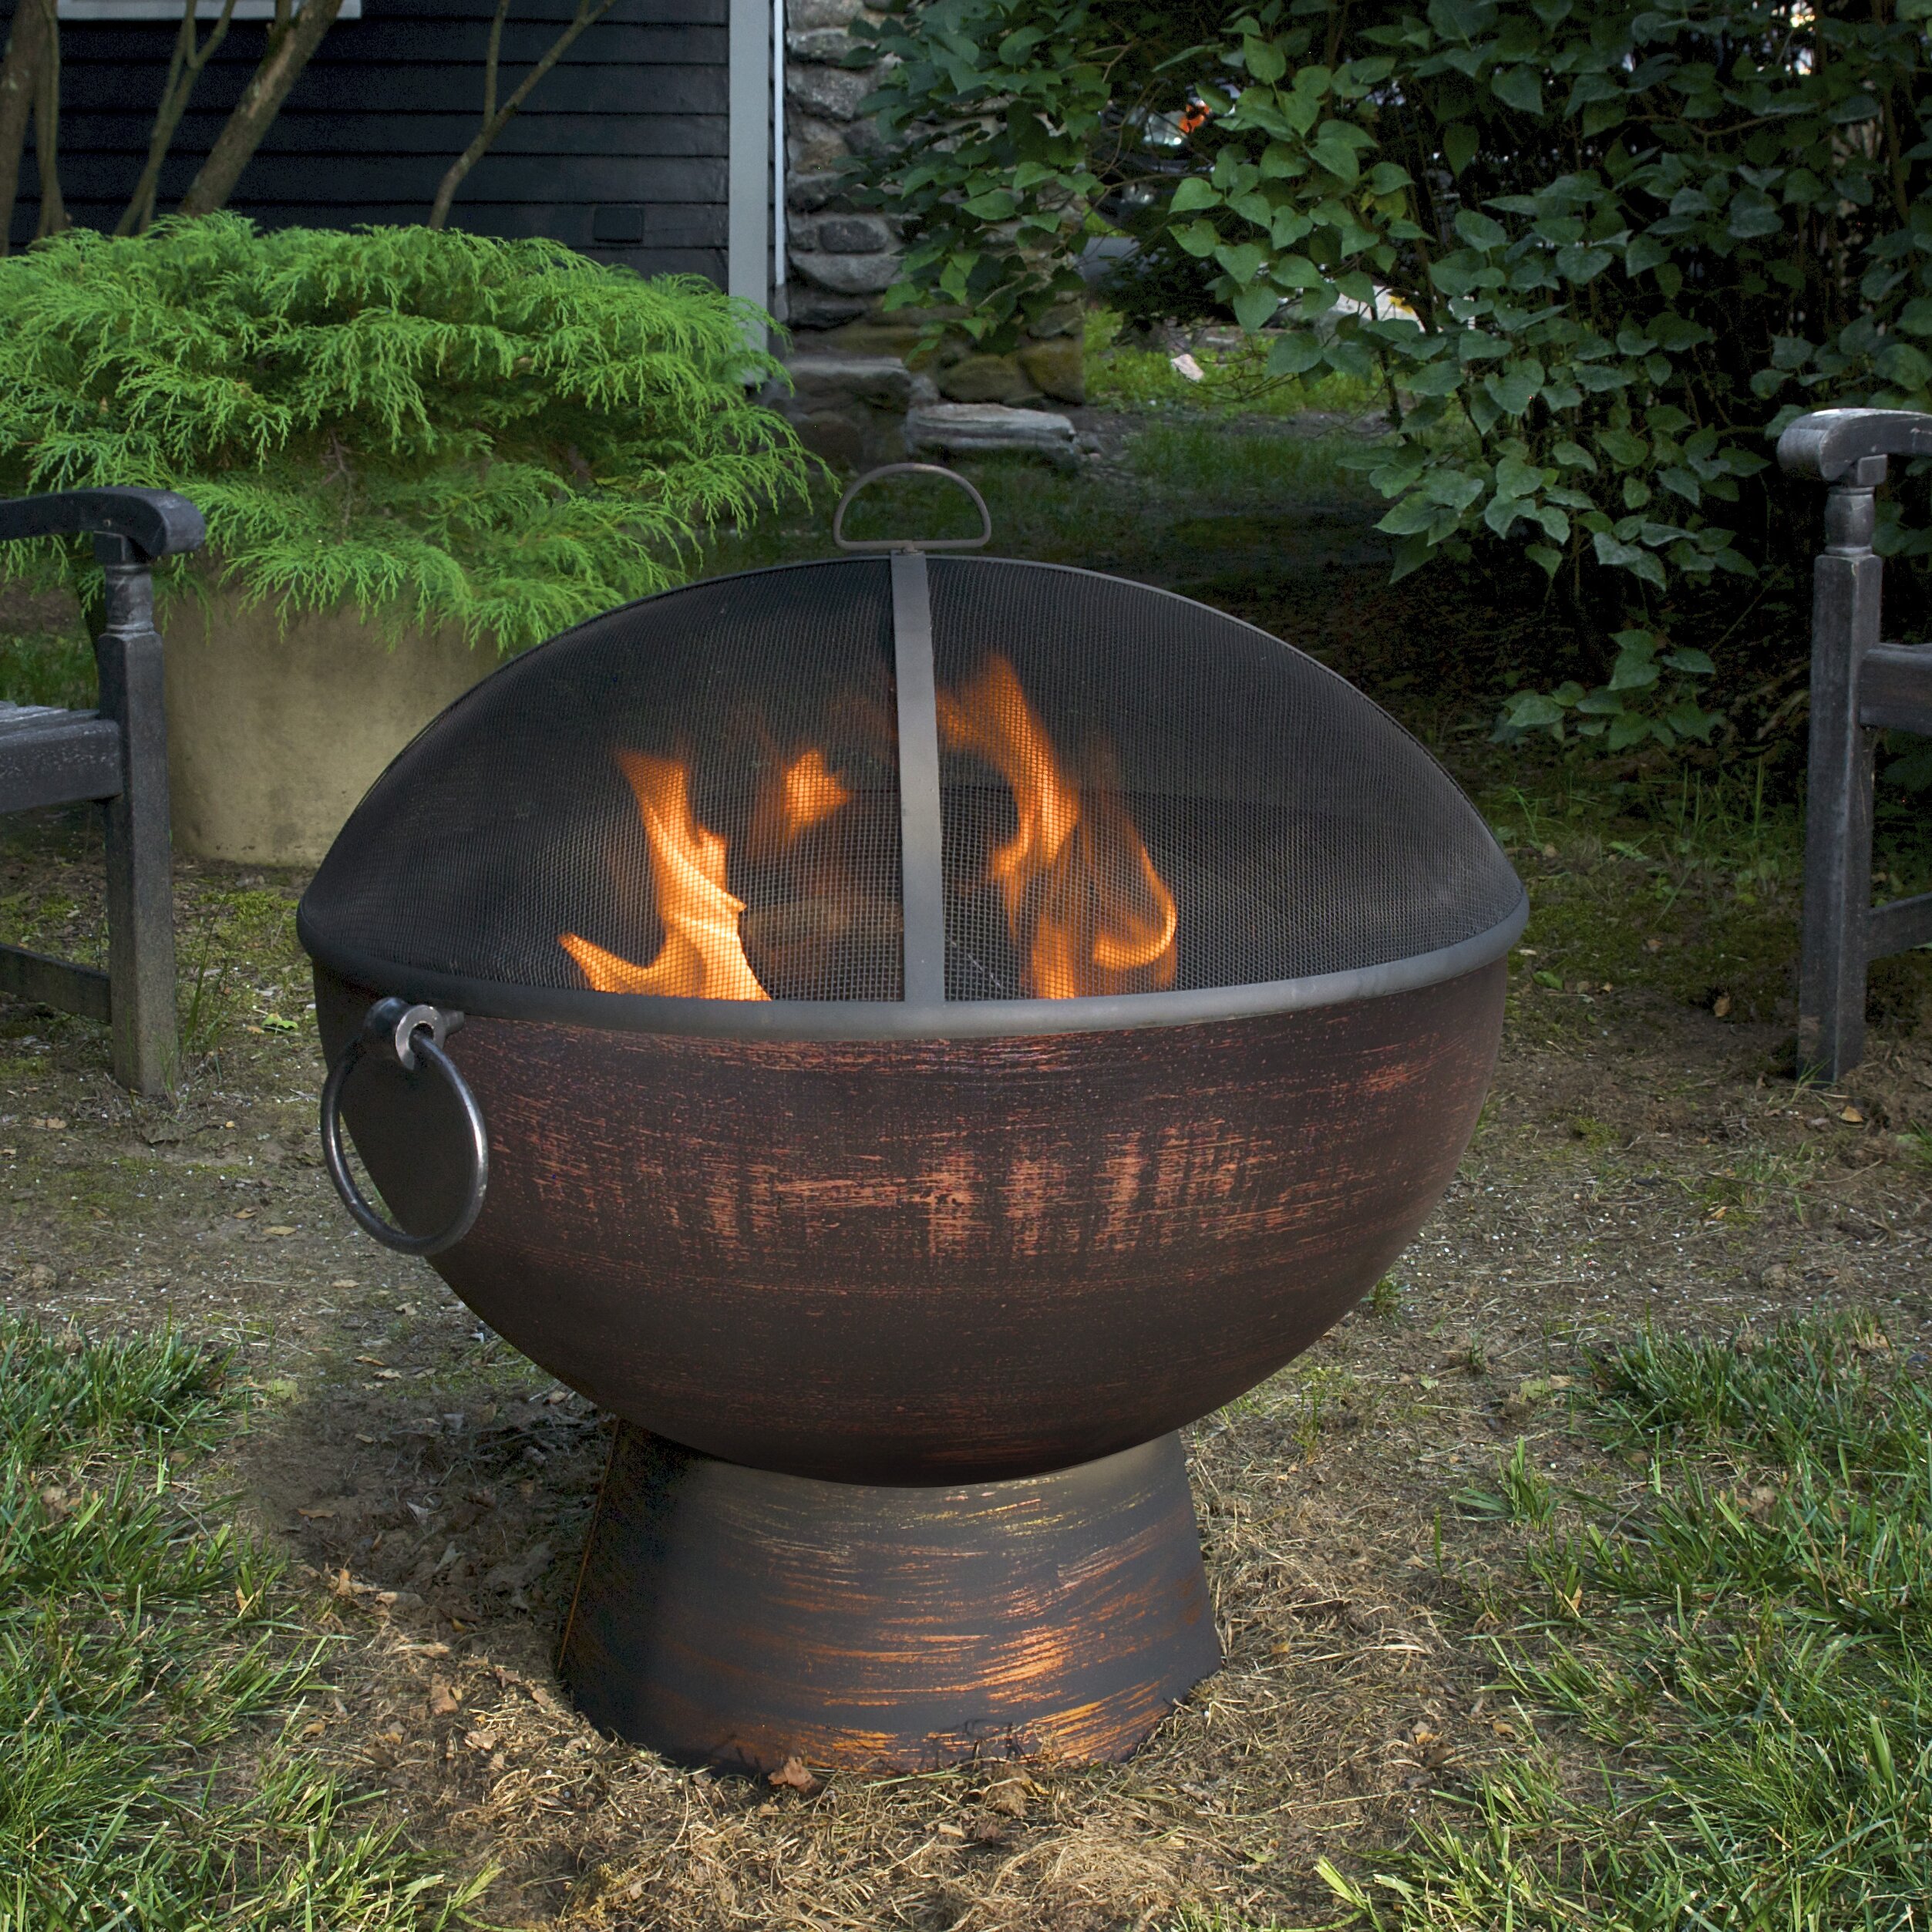 Good Directions Steel Charcoal Fire pit & Reviews | Wayfair.ca